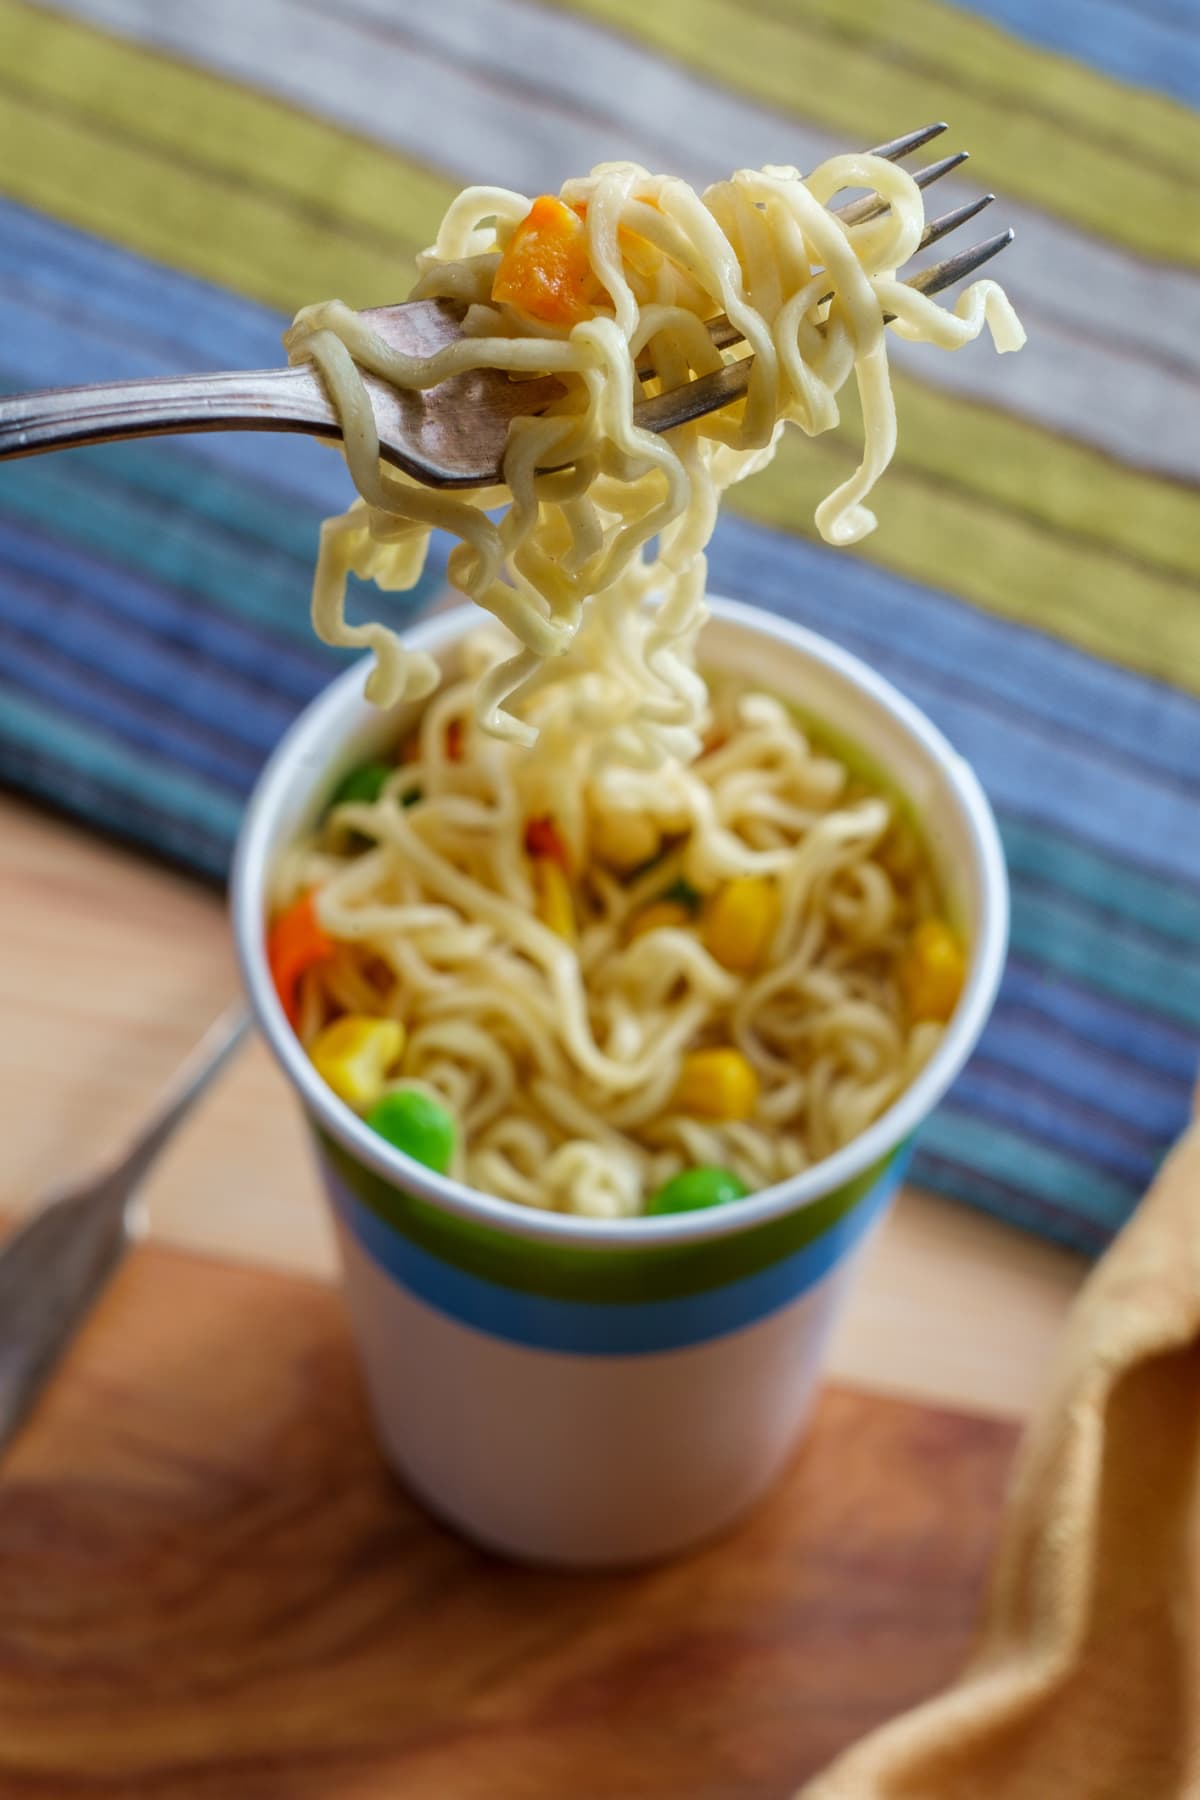 A forkful of noodles being lifted from a cup of instant ramen